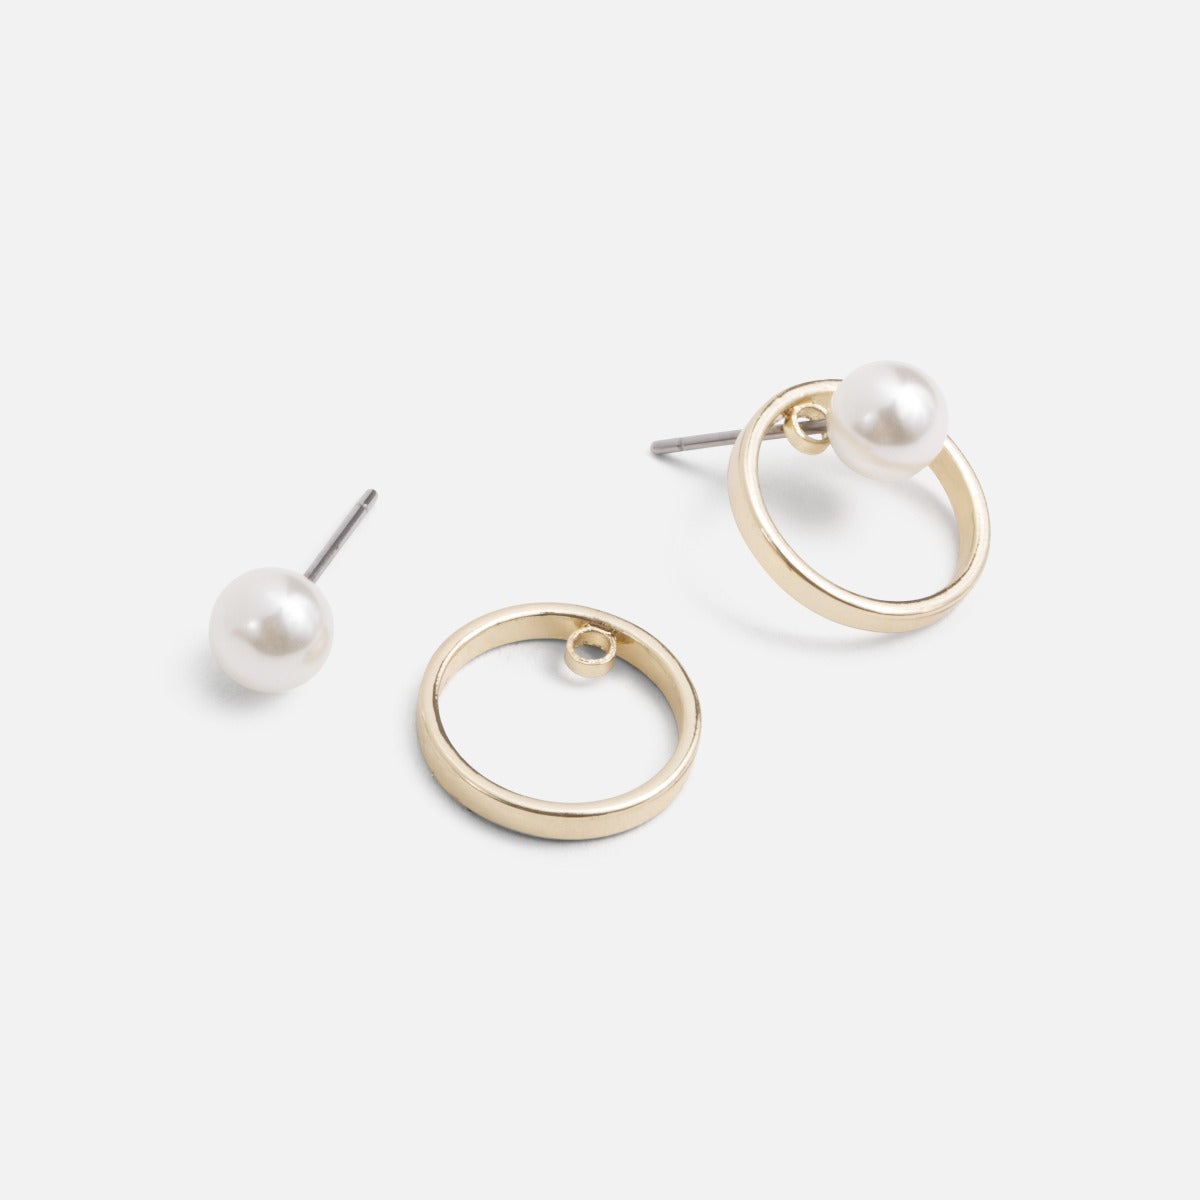 Small versatile earrings with circle and pearl